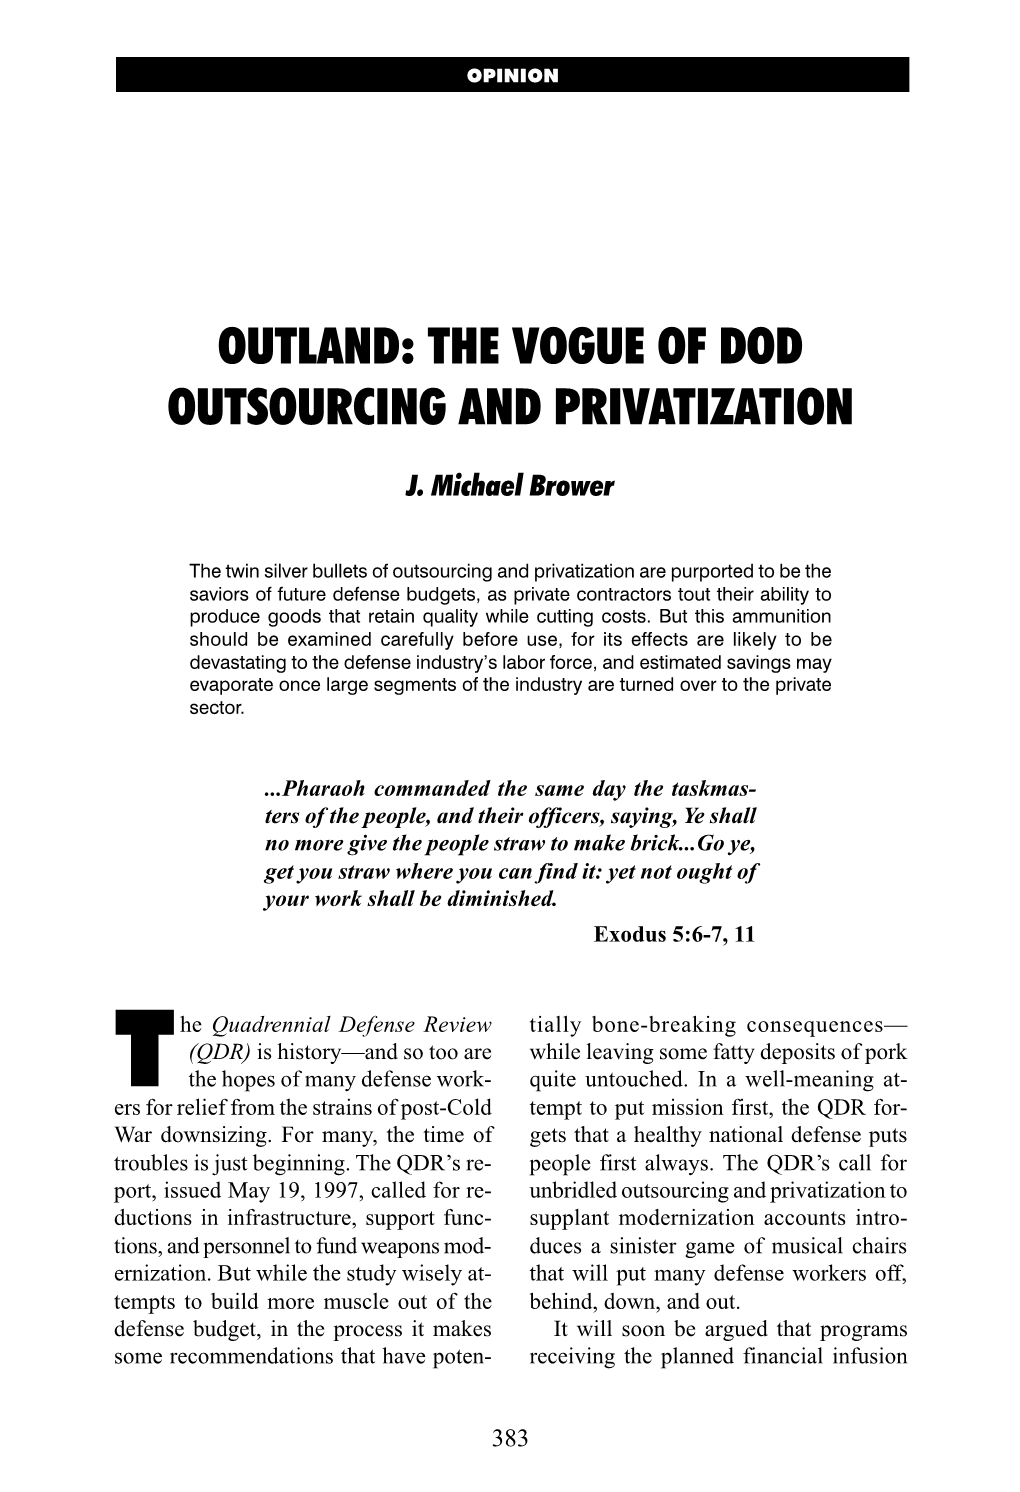 Outland: the Vogue of Dod Outsourcing and Privatization